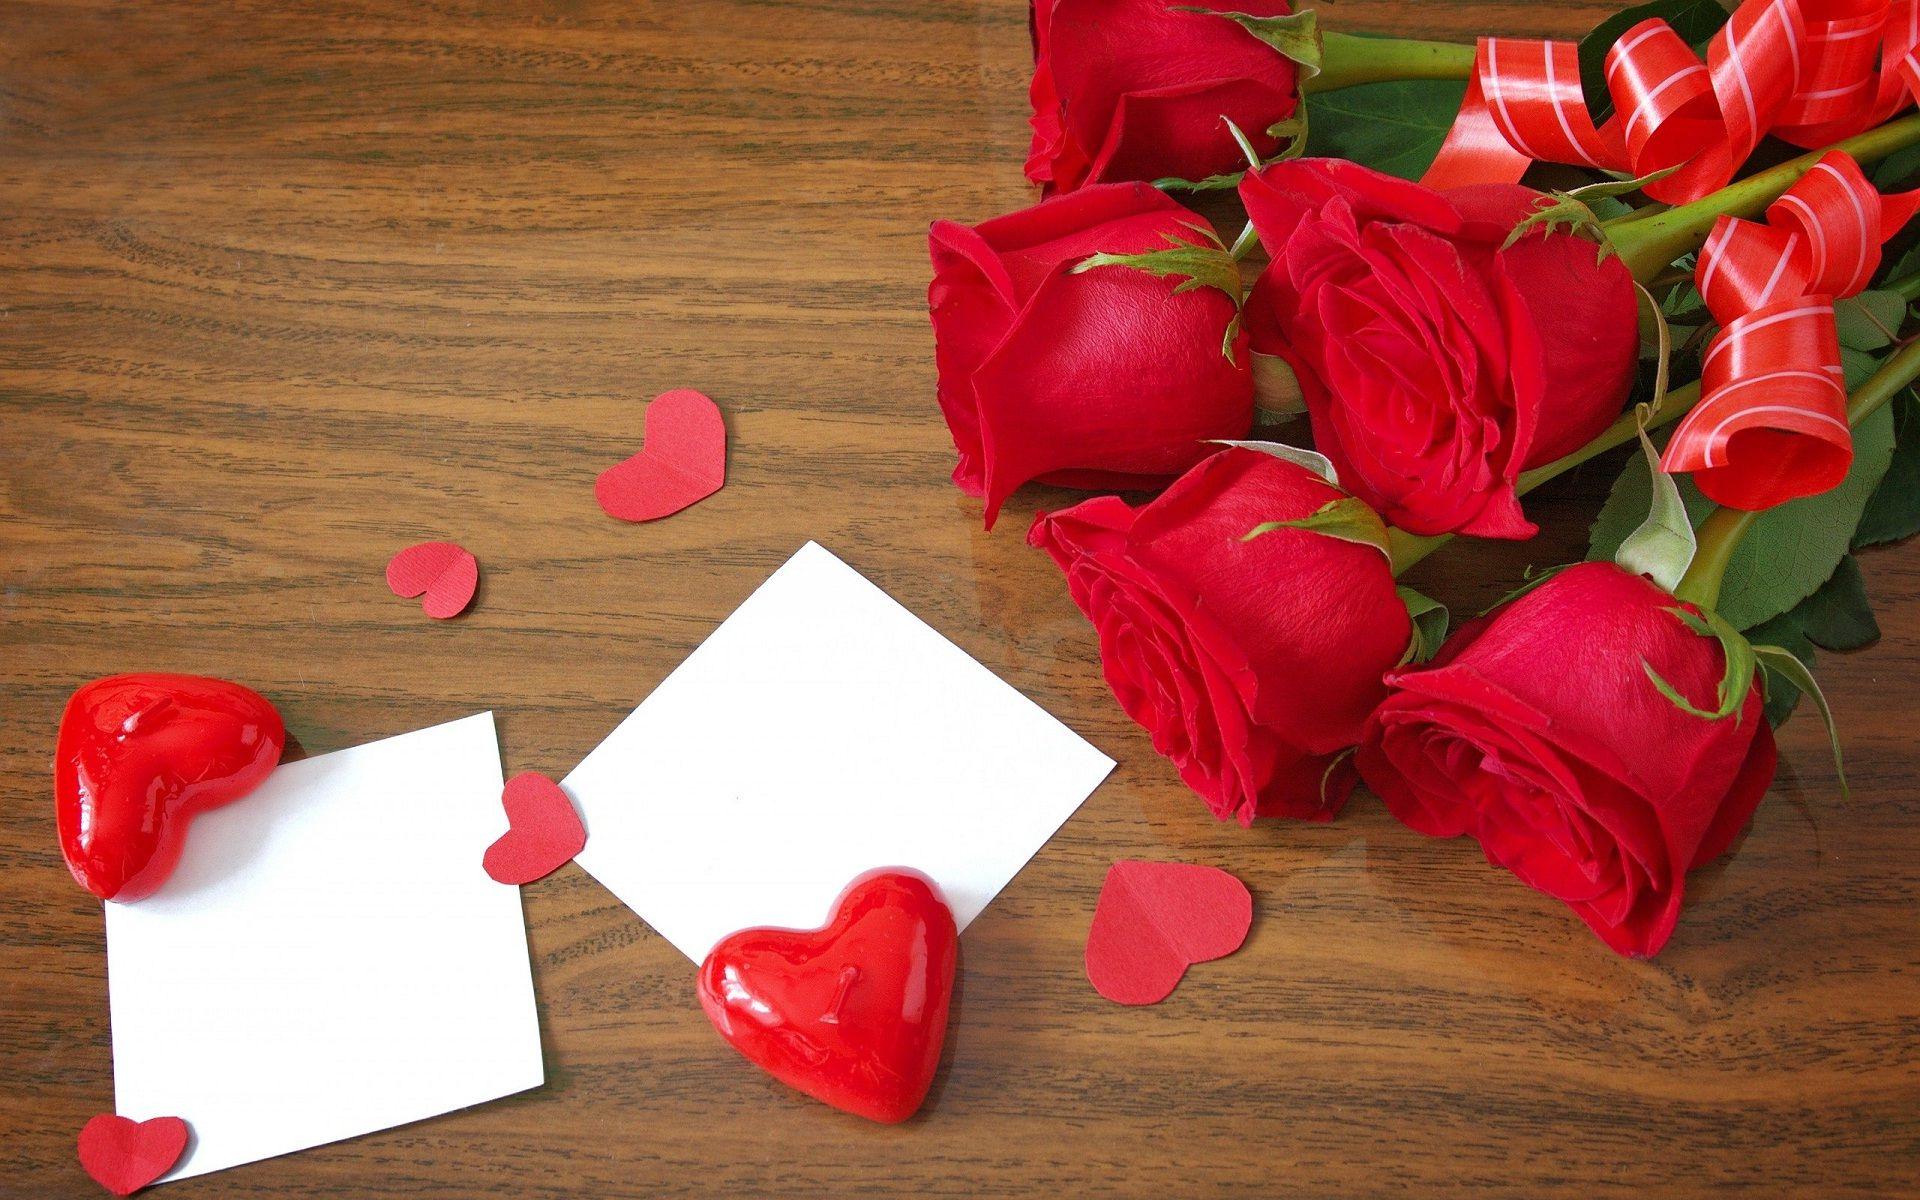 Love Letters Hearts And Red Rose New Wallpaper With Letter